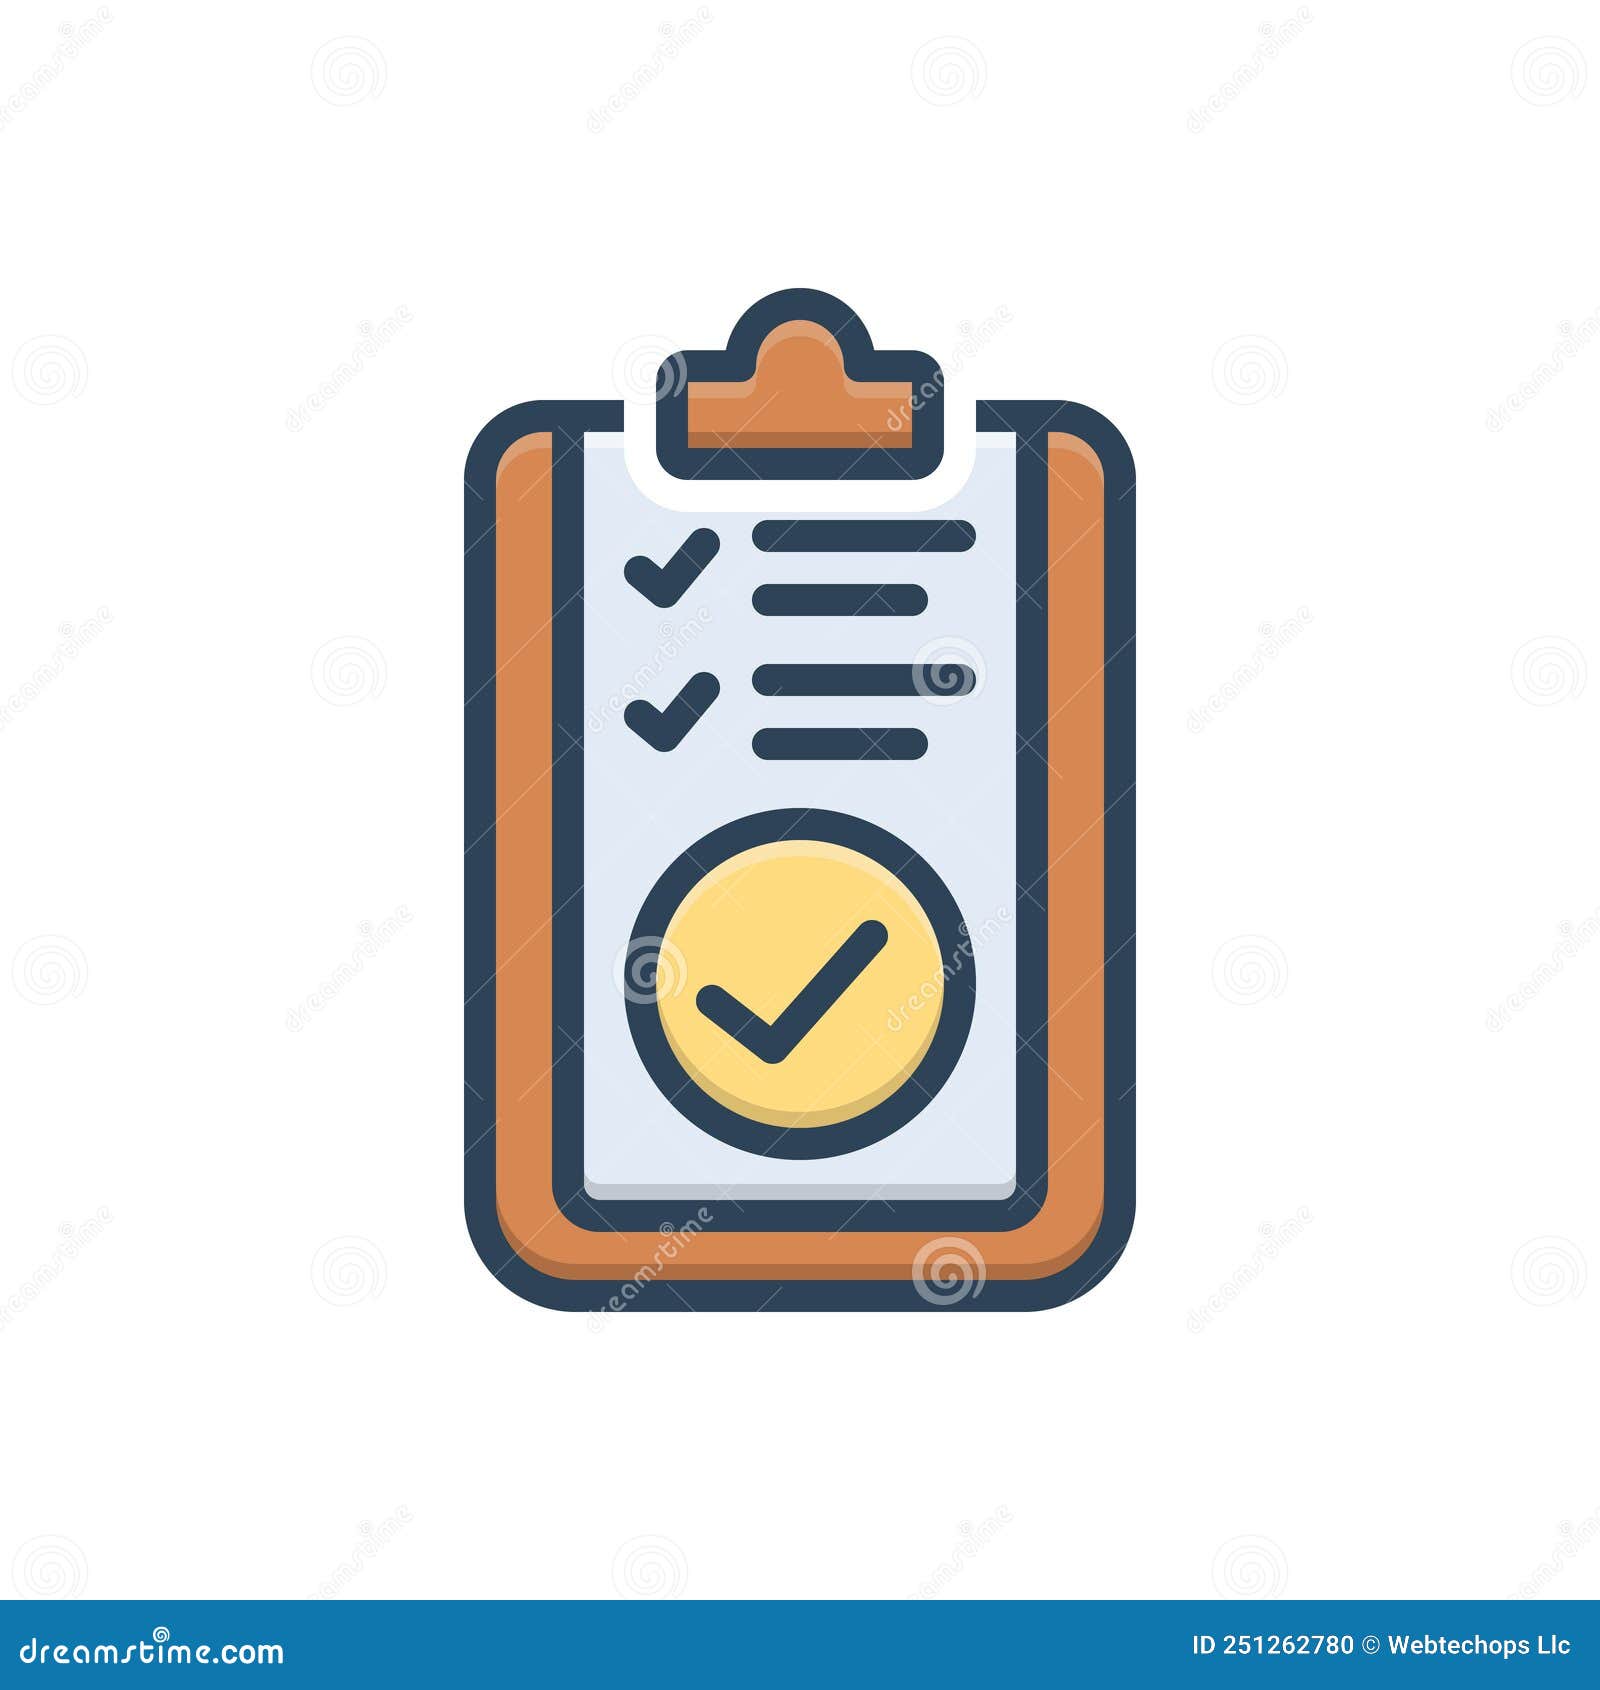 color  icon for assessed, appraise and check